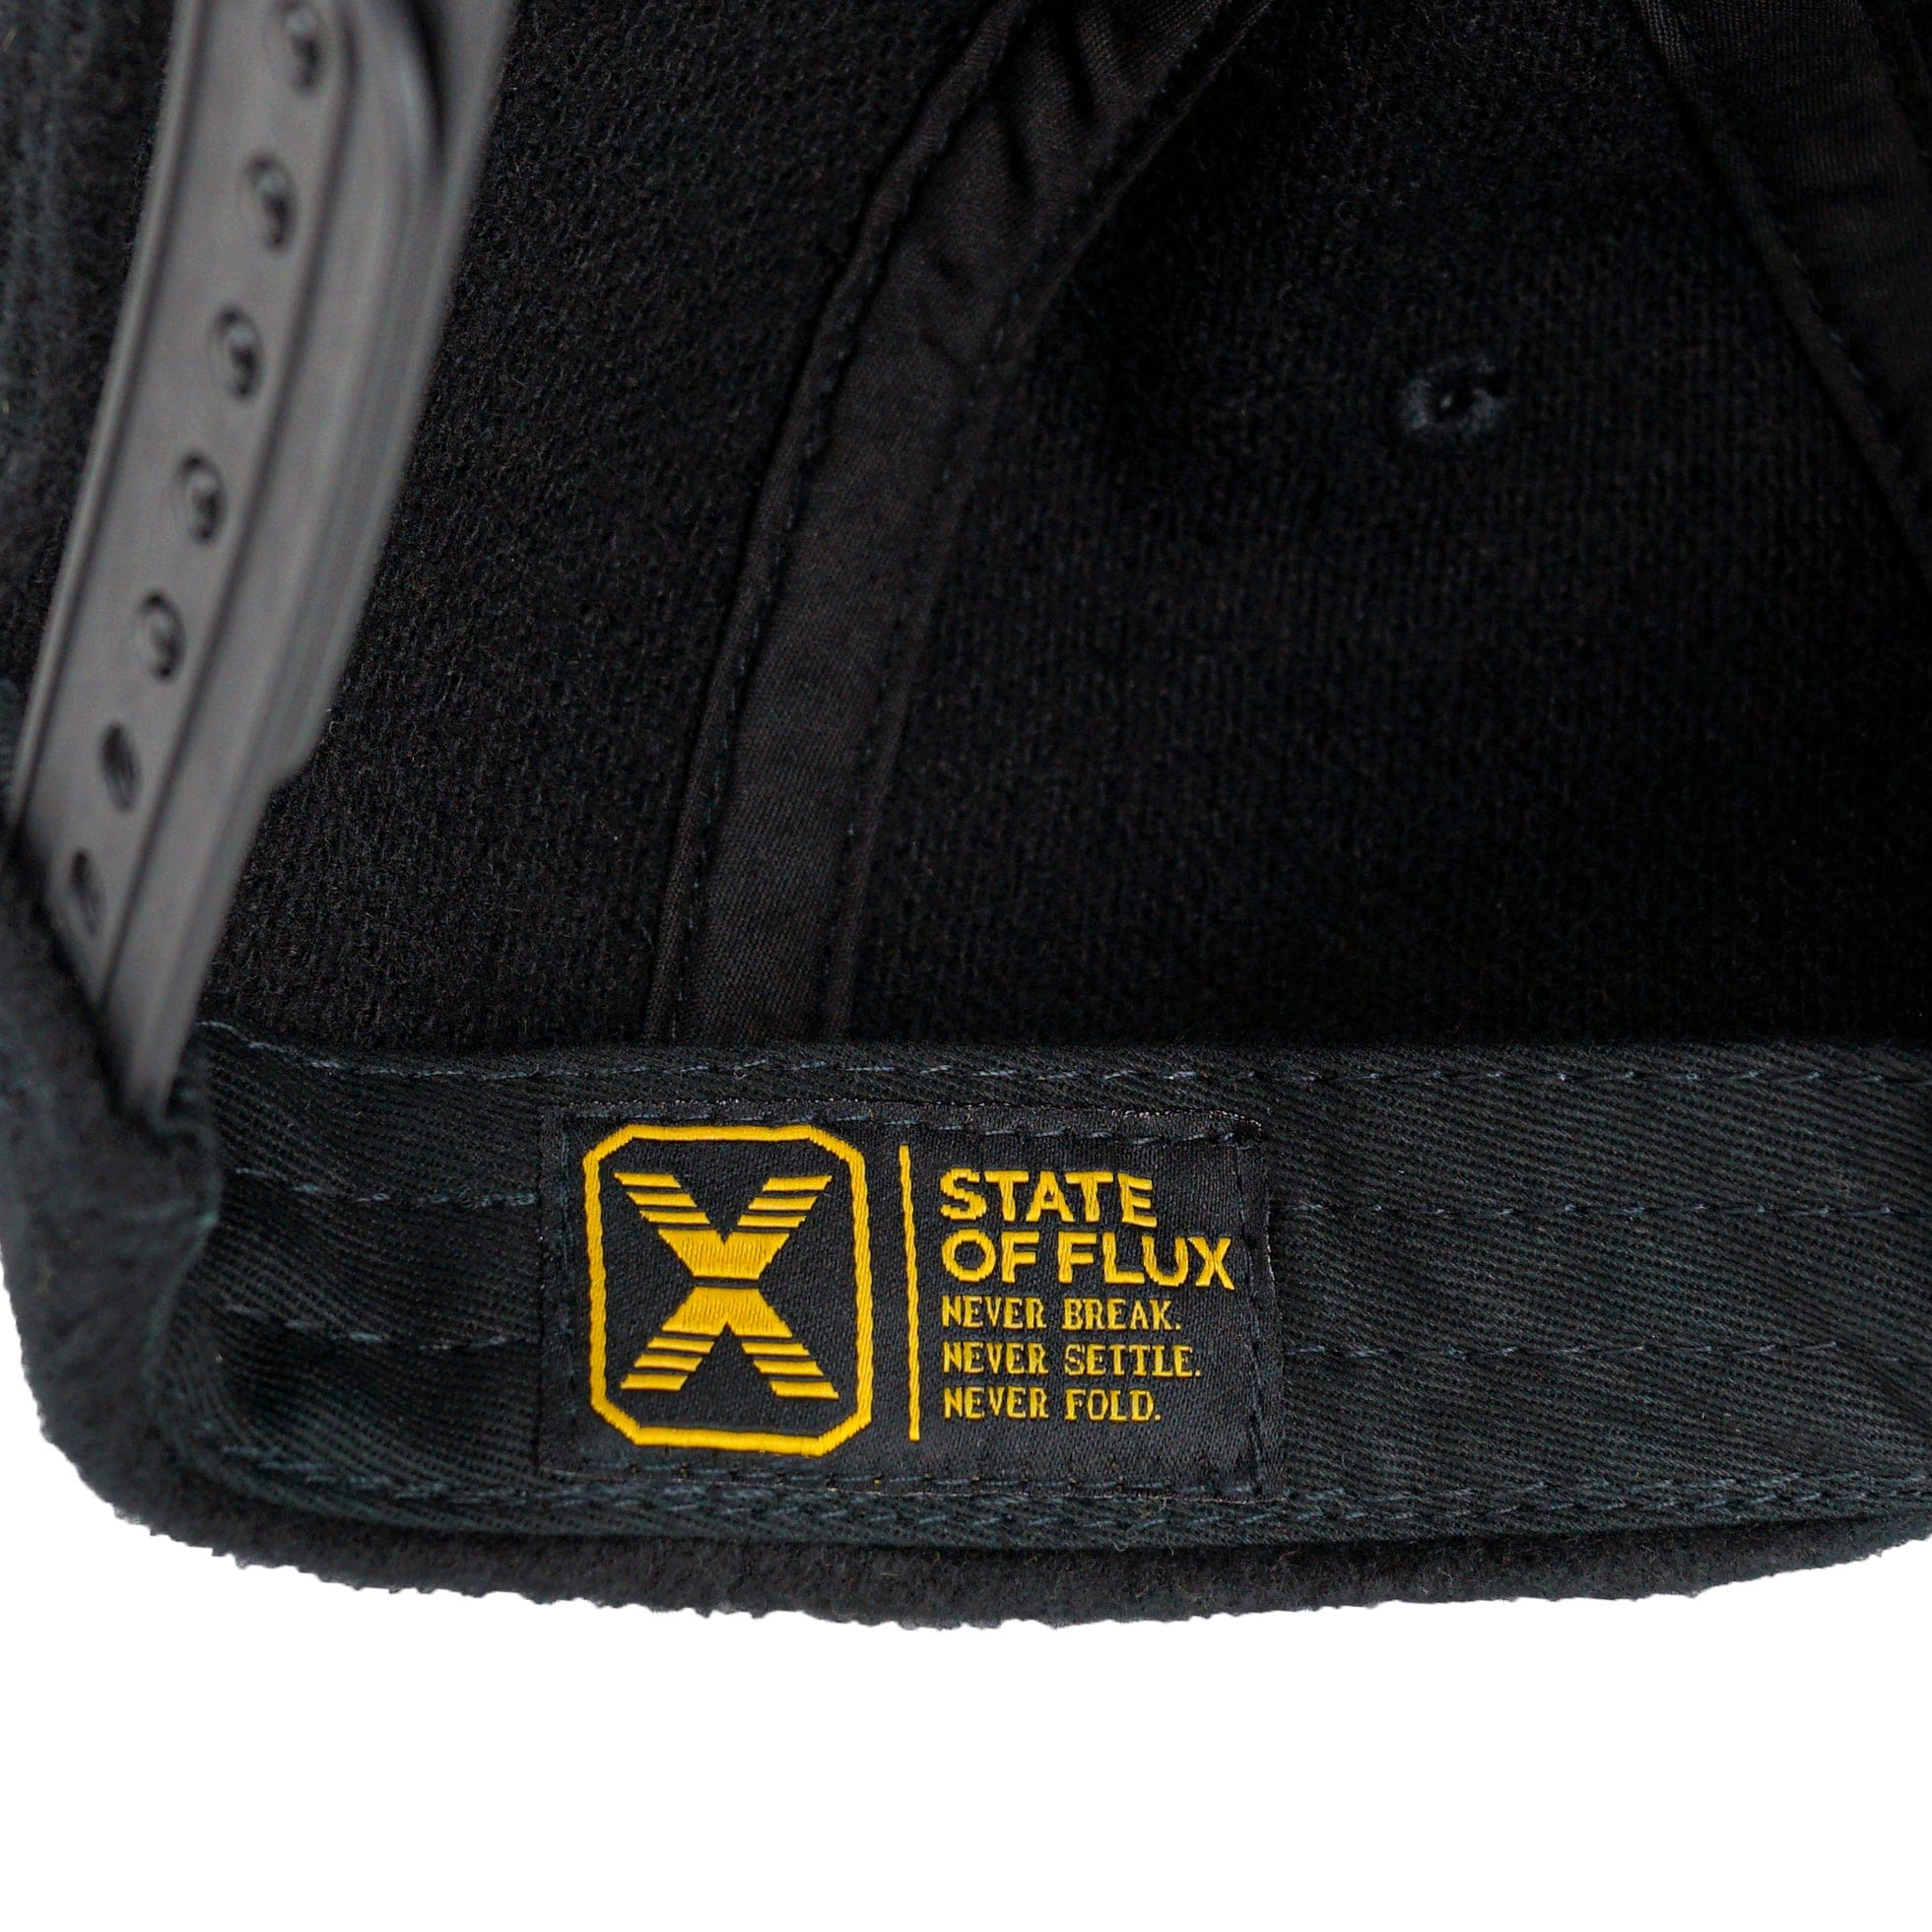 SOF Unstructured Snapback Hat in black - State Of Flux - State Of Flux